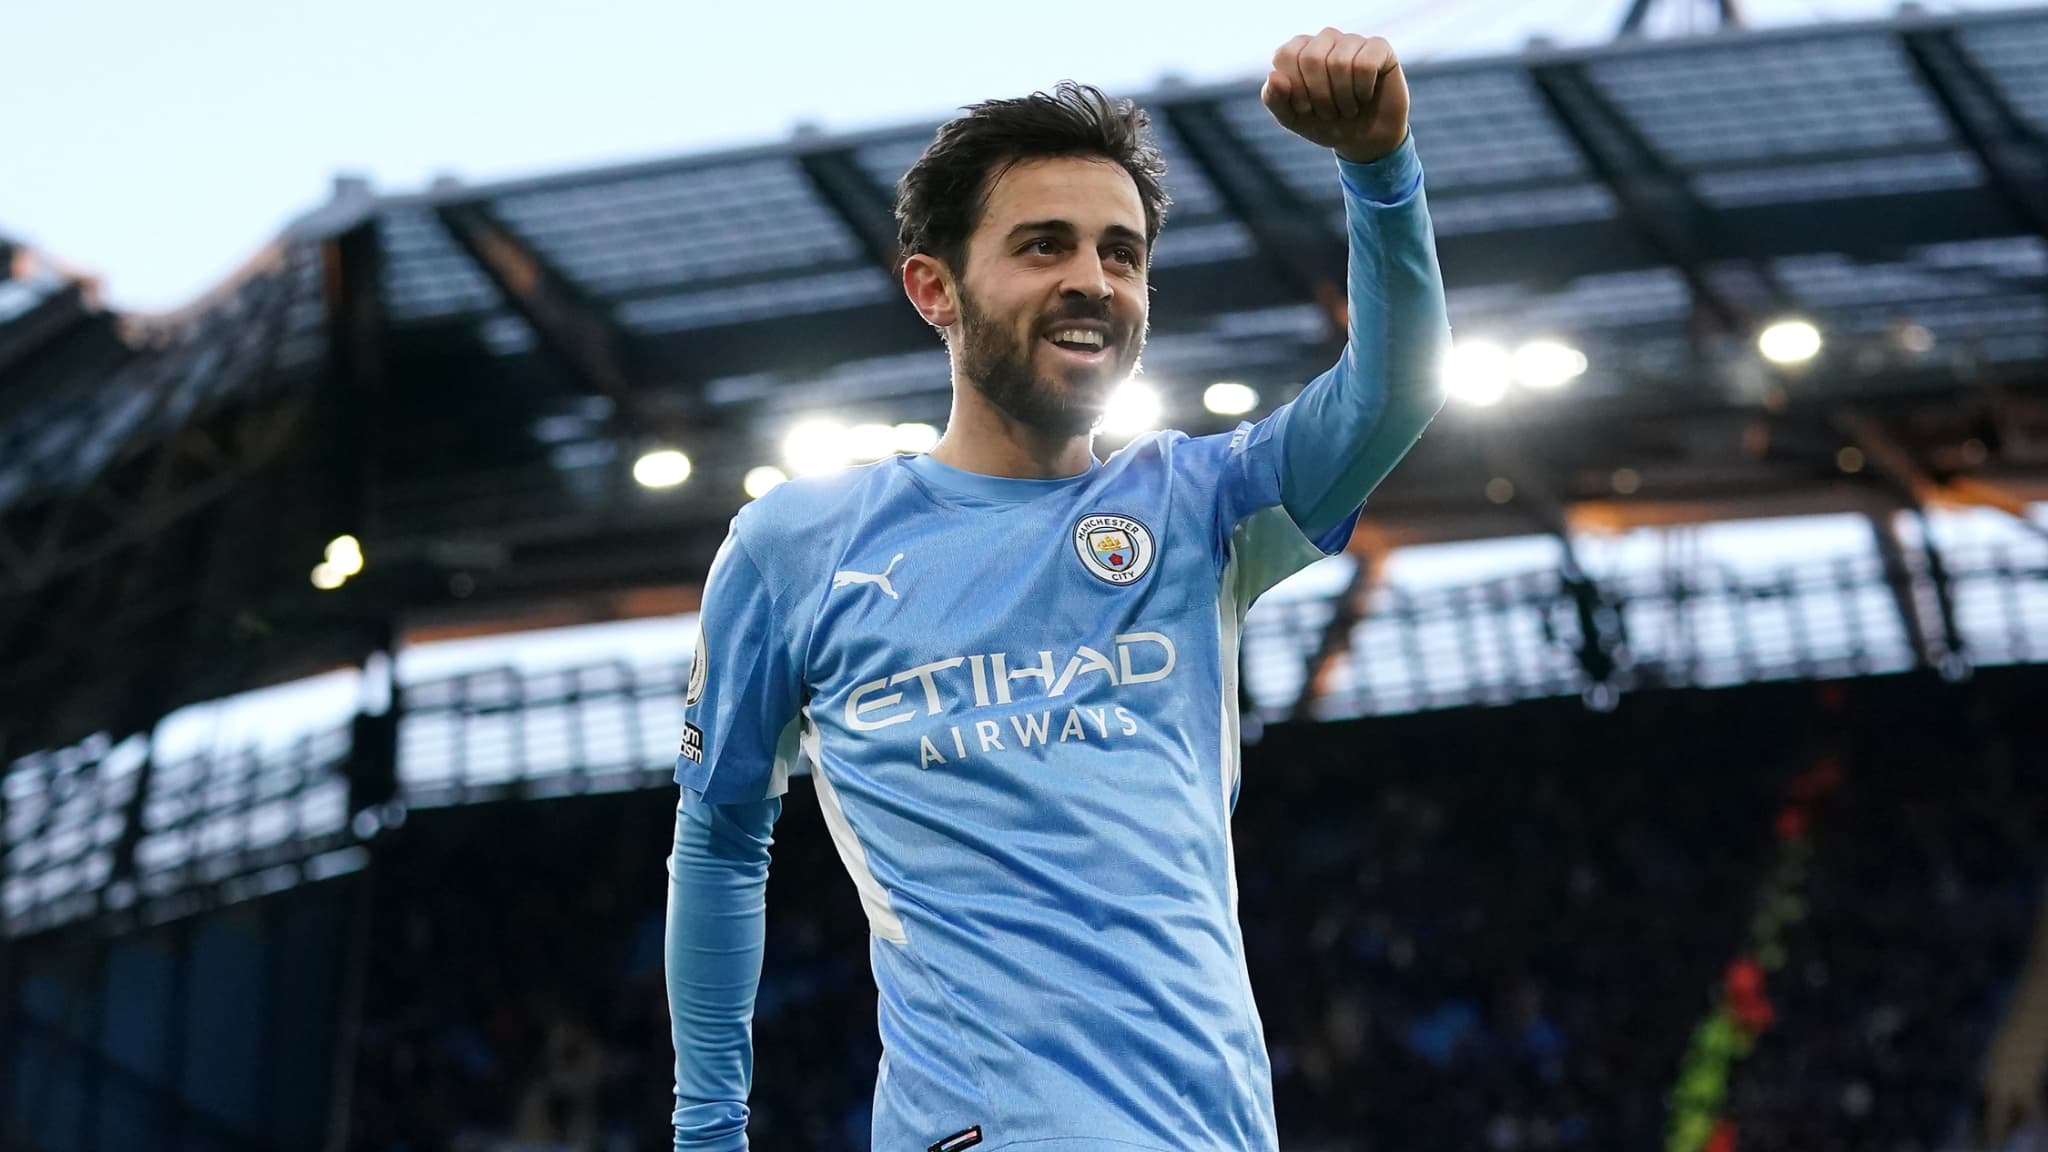 Bernardo Silva wants to return to Benfica “in a year or two”.